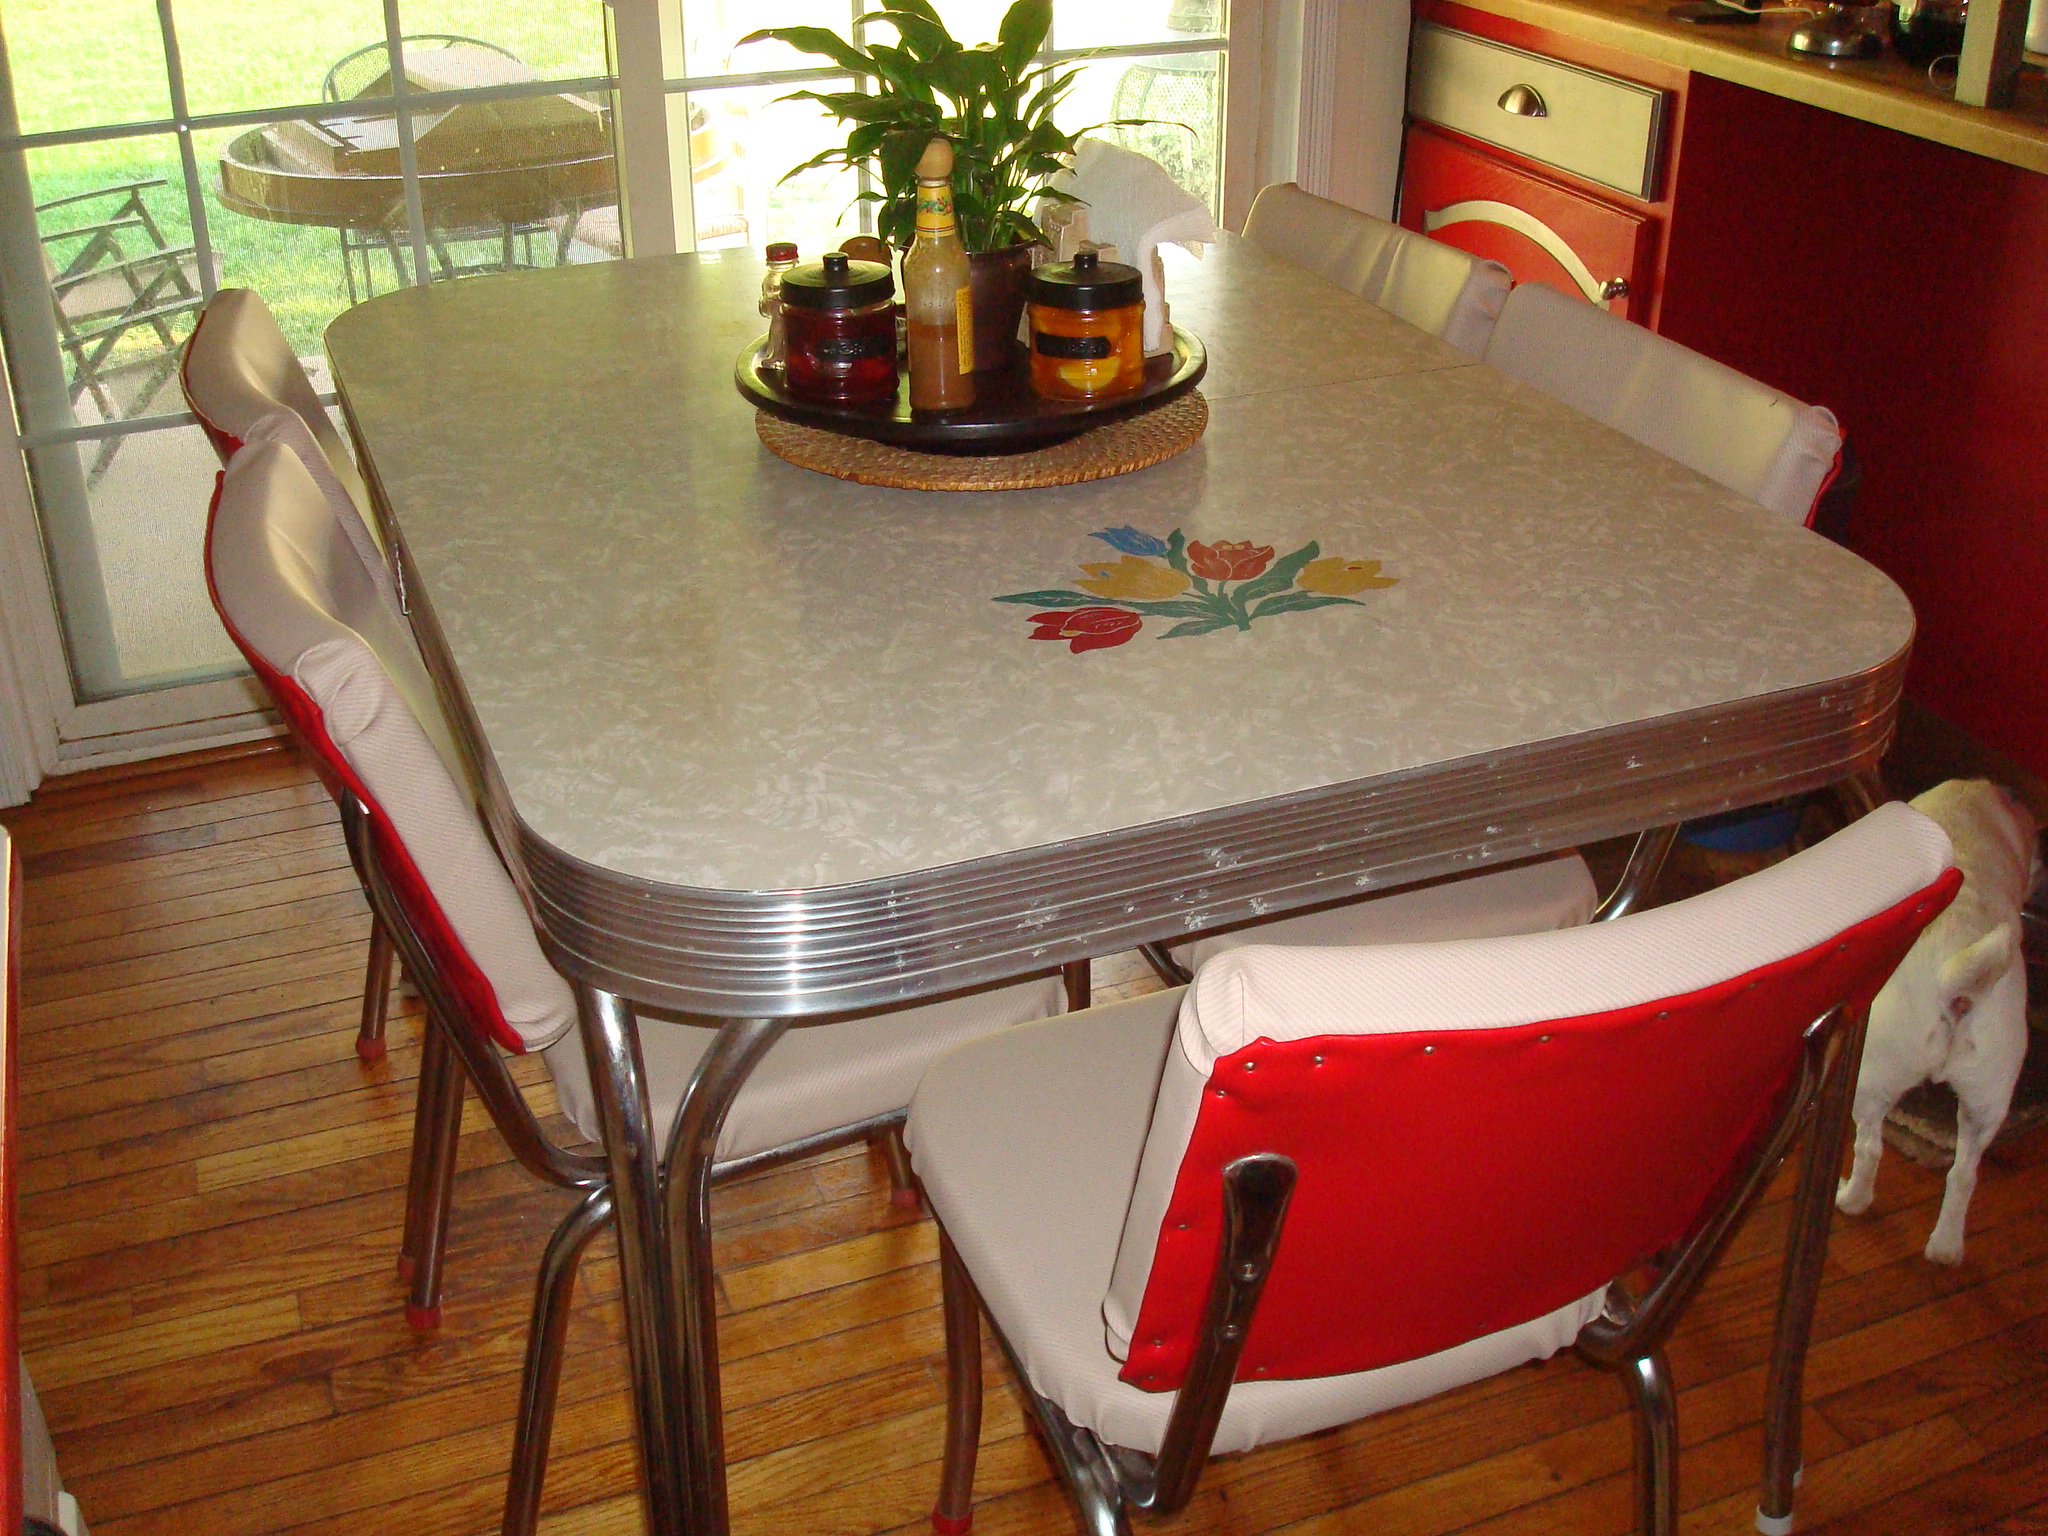 kitchen table of the 50's with middle extension piece